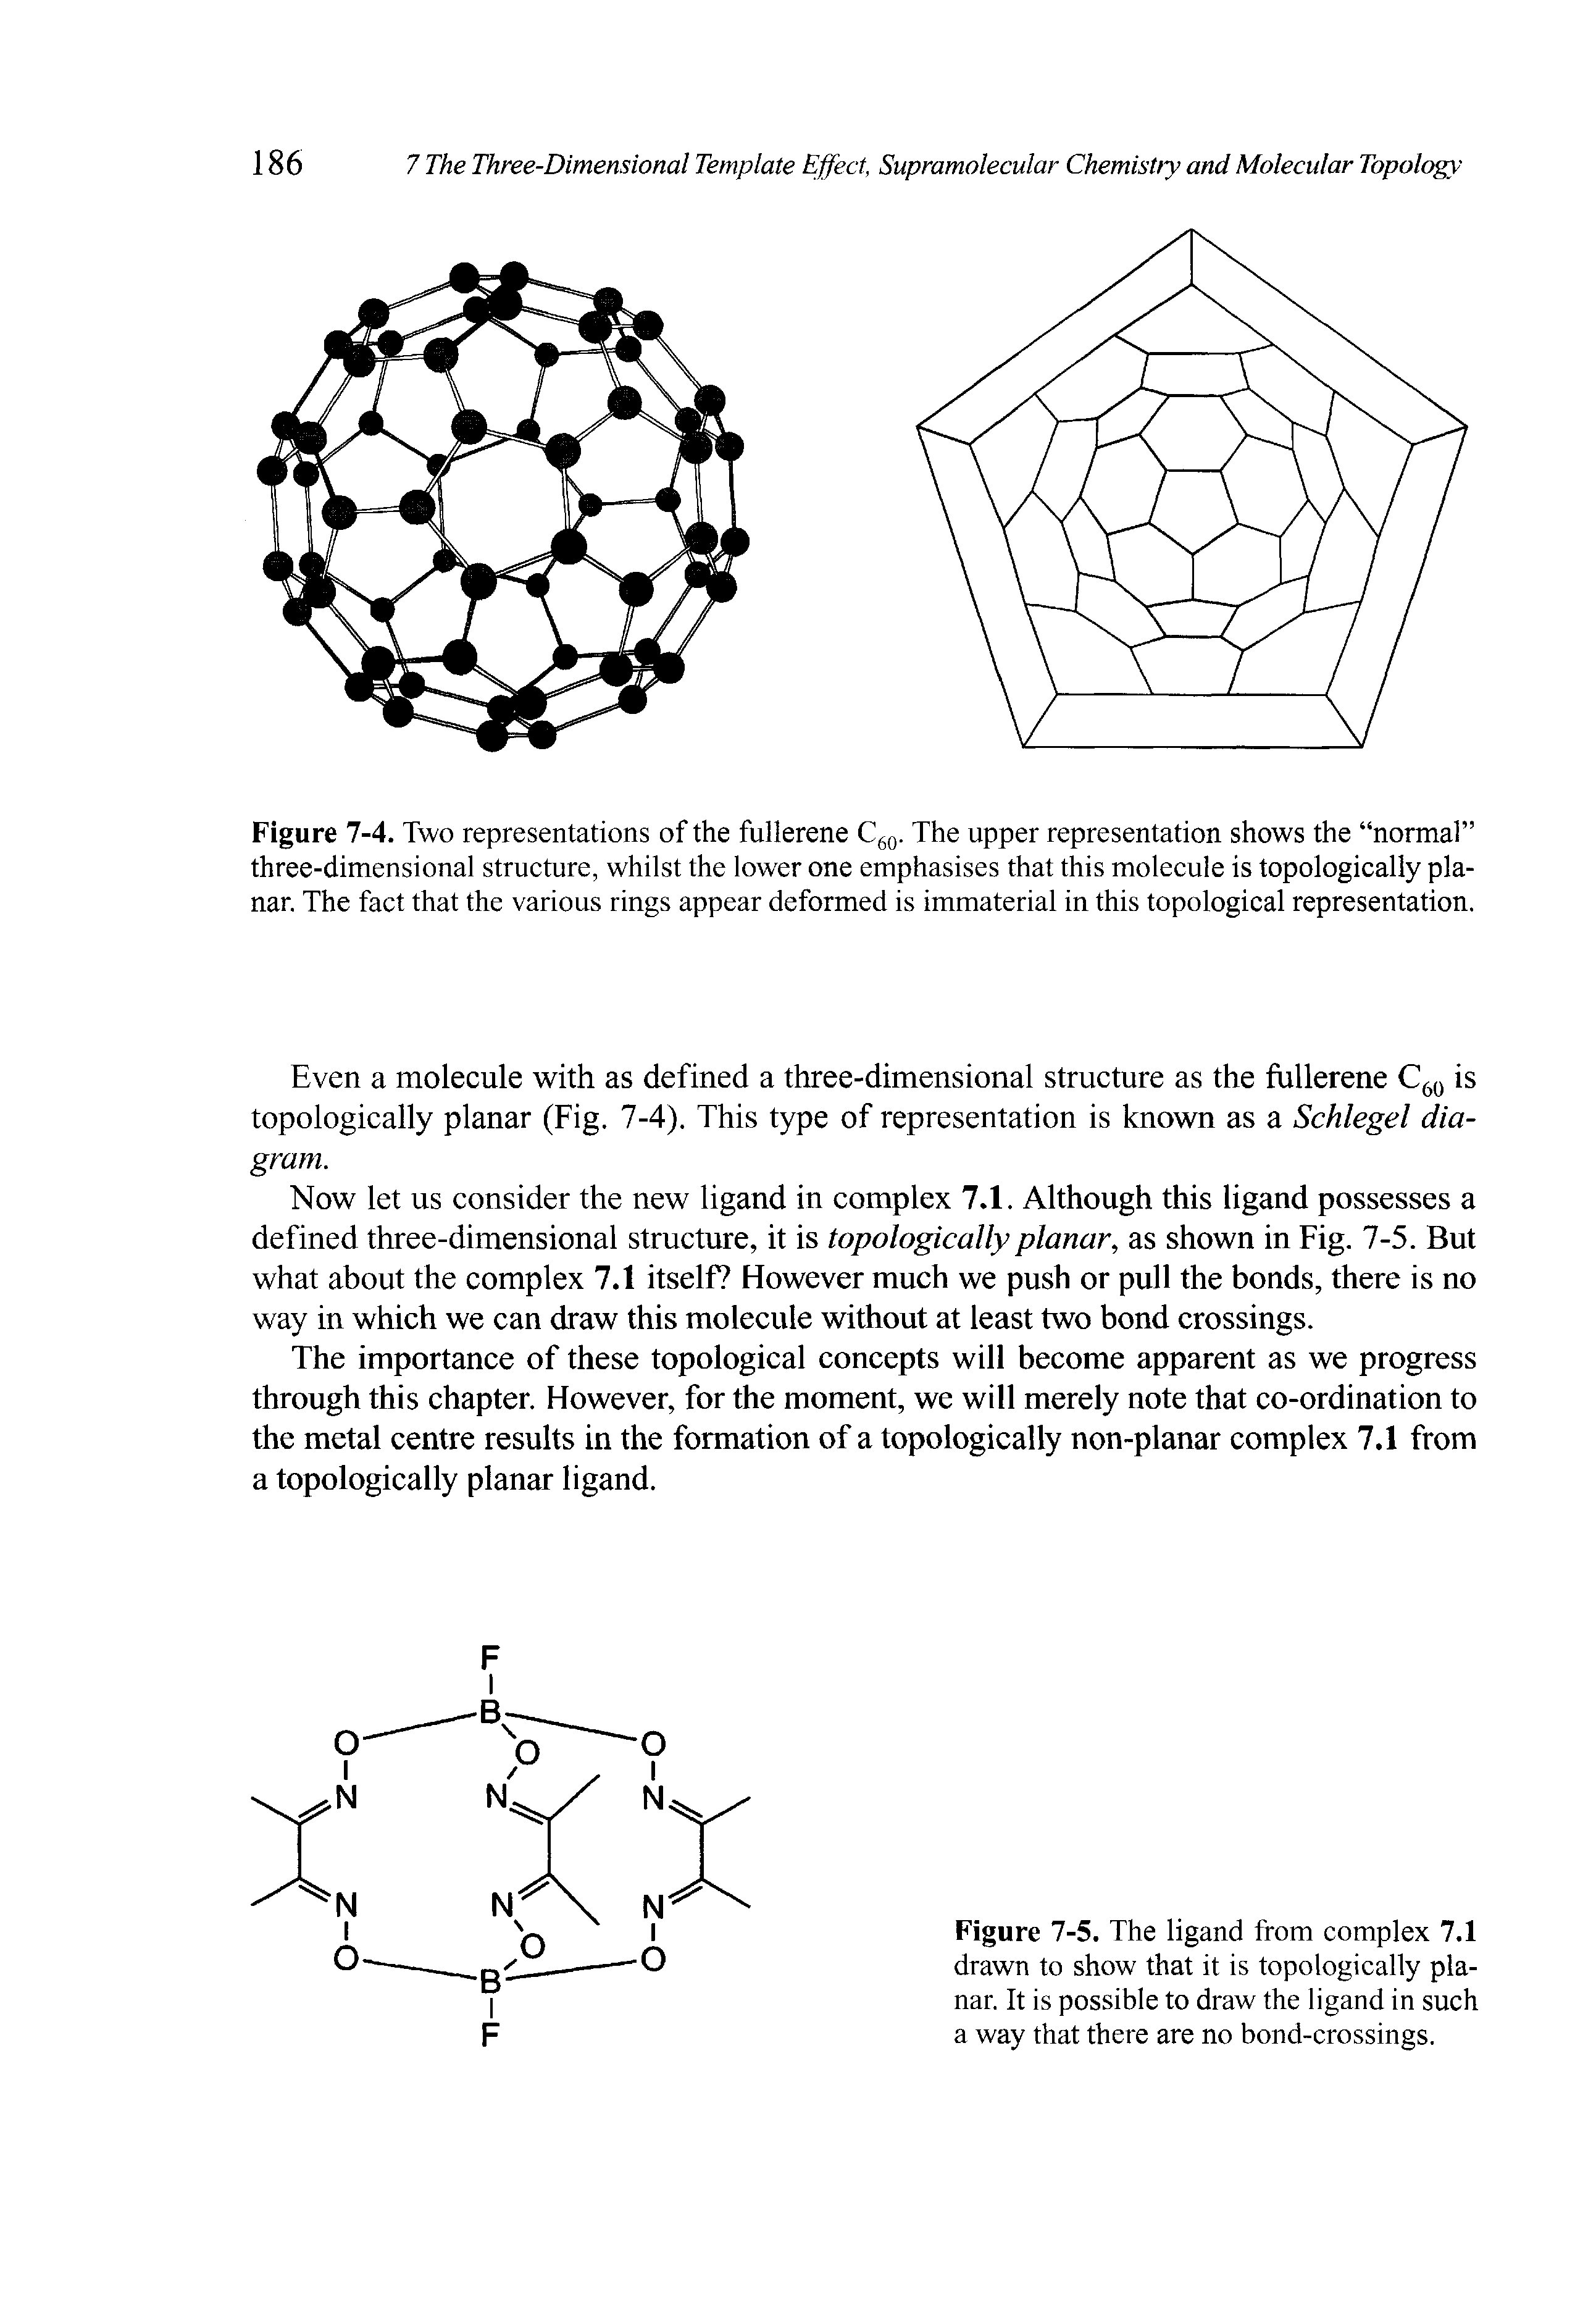 Figure 7-4. Two representations of the fullerene C60. The upper representation shows the normal three-dimensional structure, whilst the lower one emphasises that this molecule is topologically planar. The fact that the various rings appear deformed is immaterial in this topological representation.